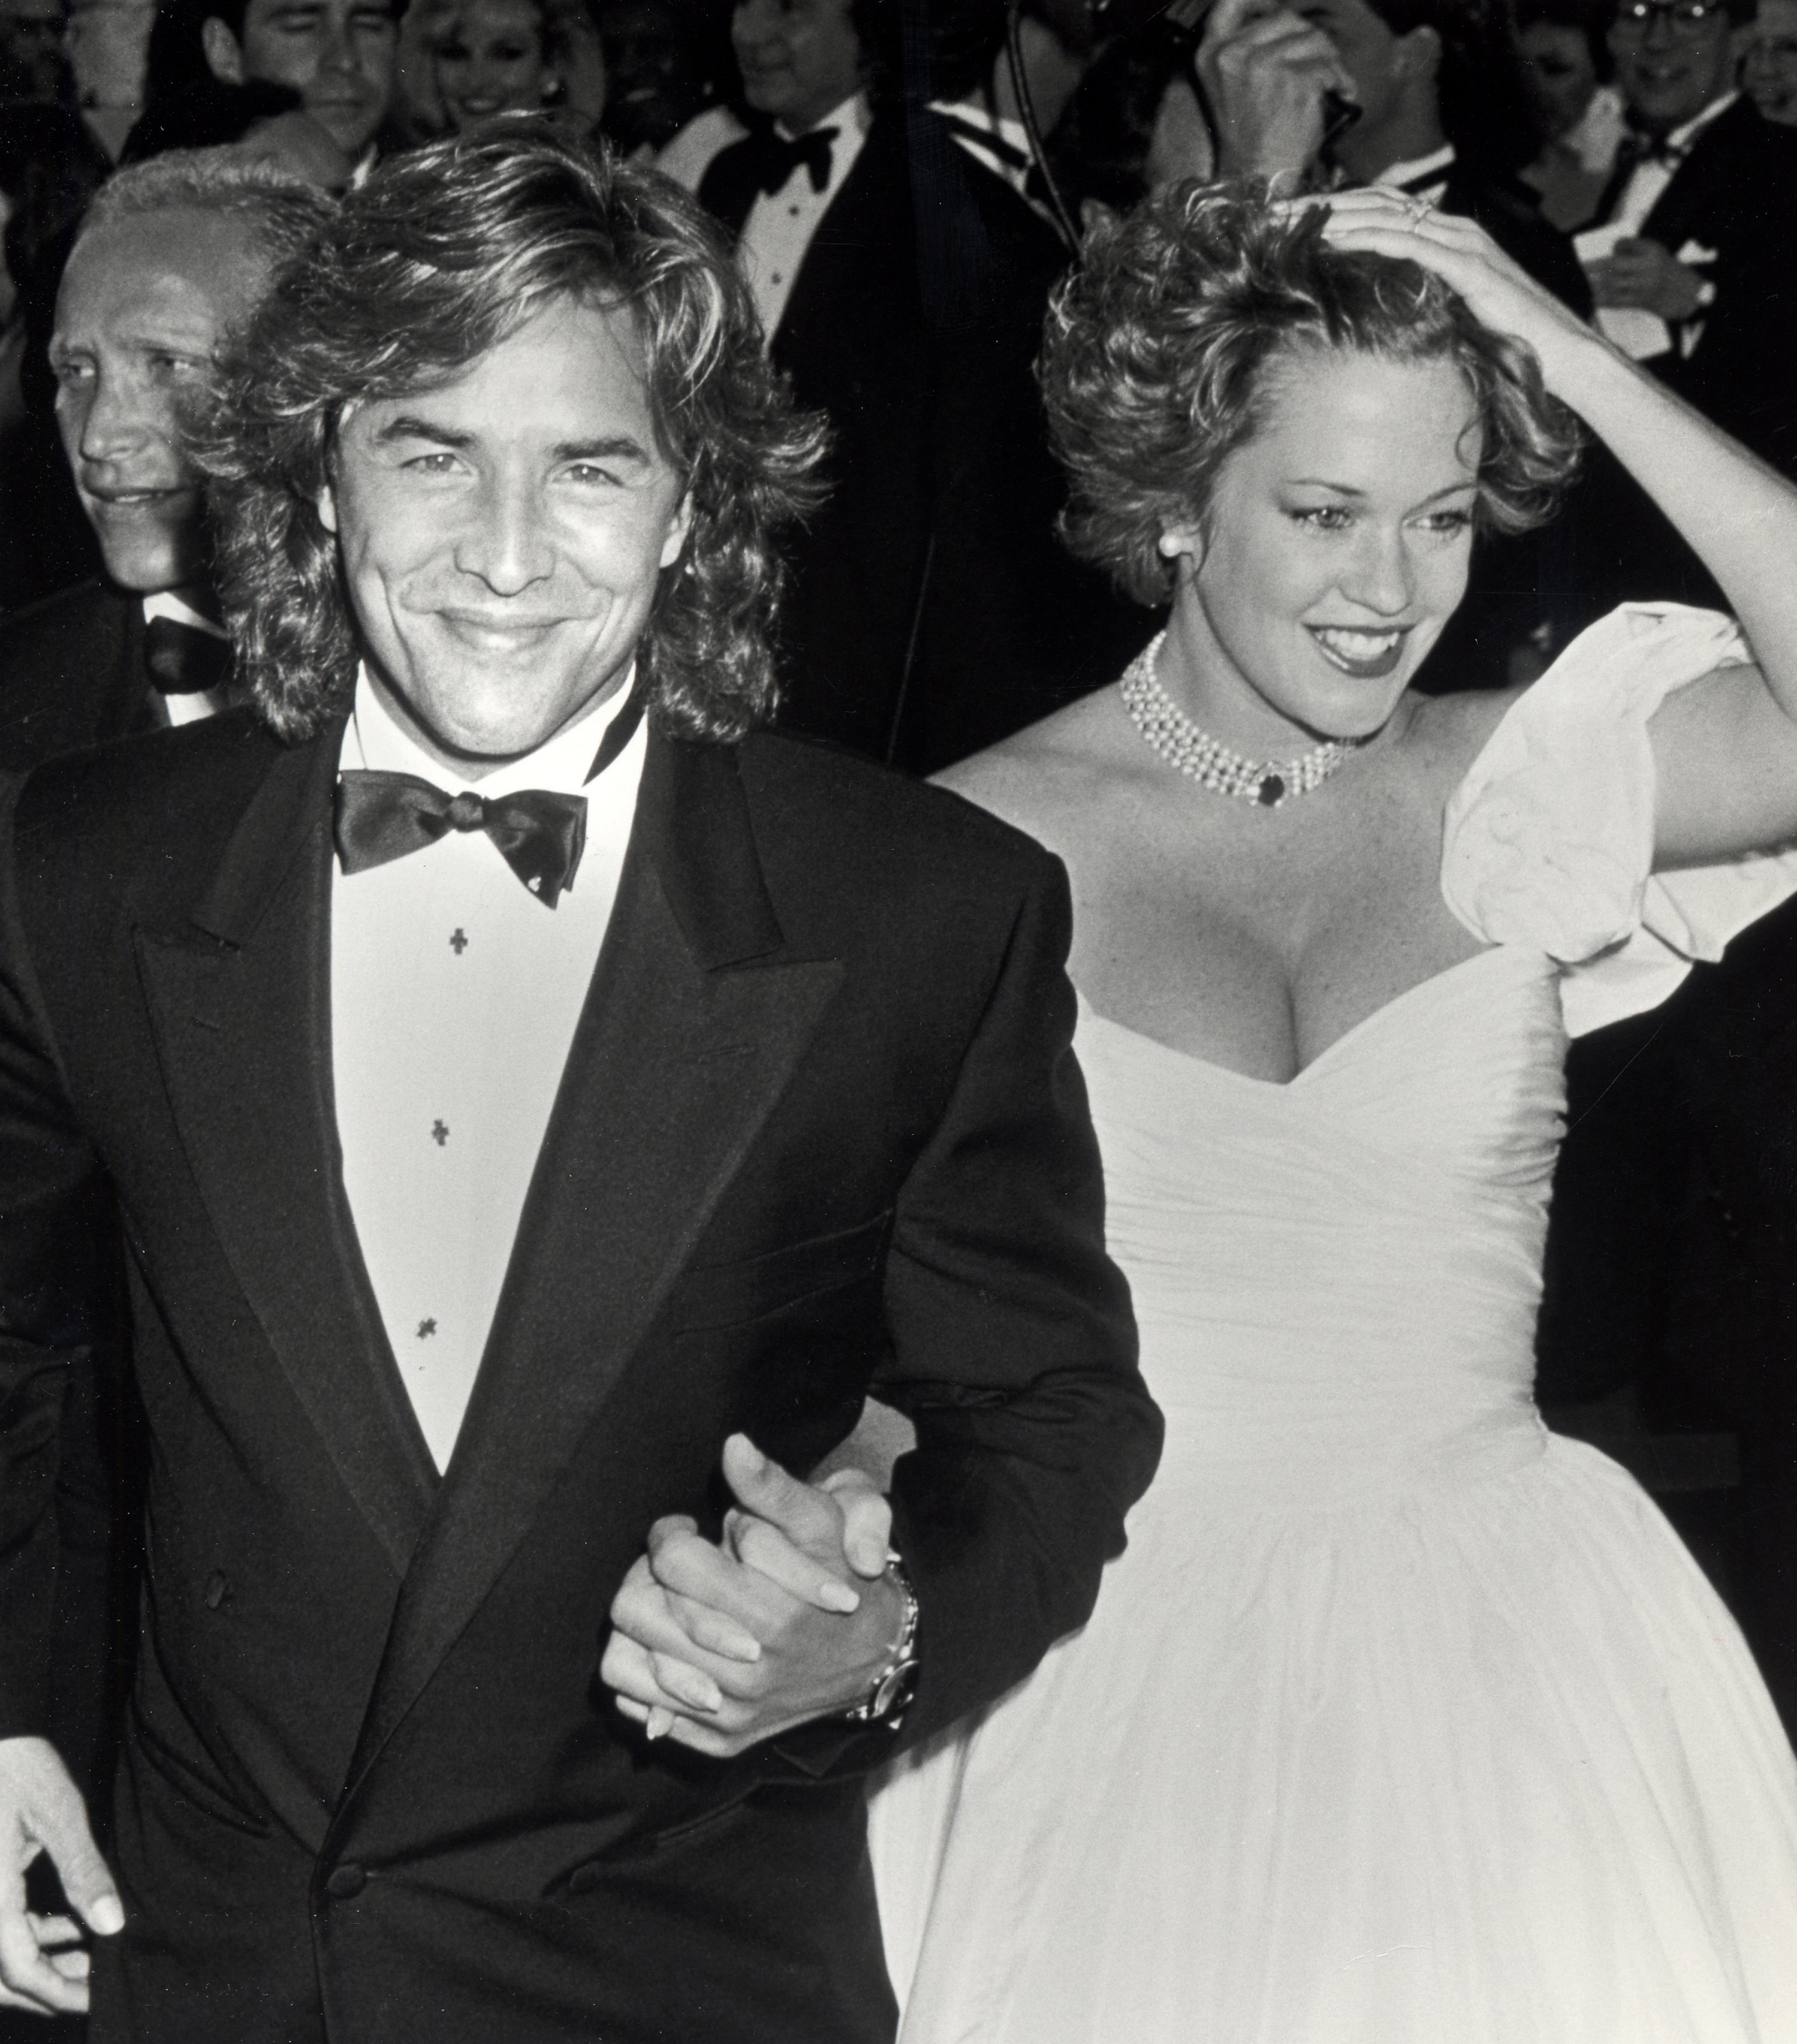 Don Johnson and Melanie Griffith during 61st Annual Academy Awards - Arrivals at Shrine Auditorium in Los Angeles, California, United States. | Source: Getty Images